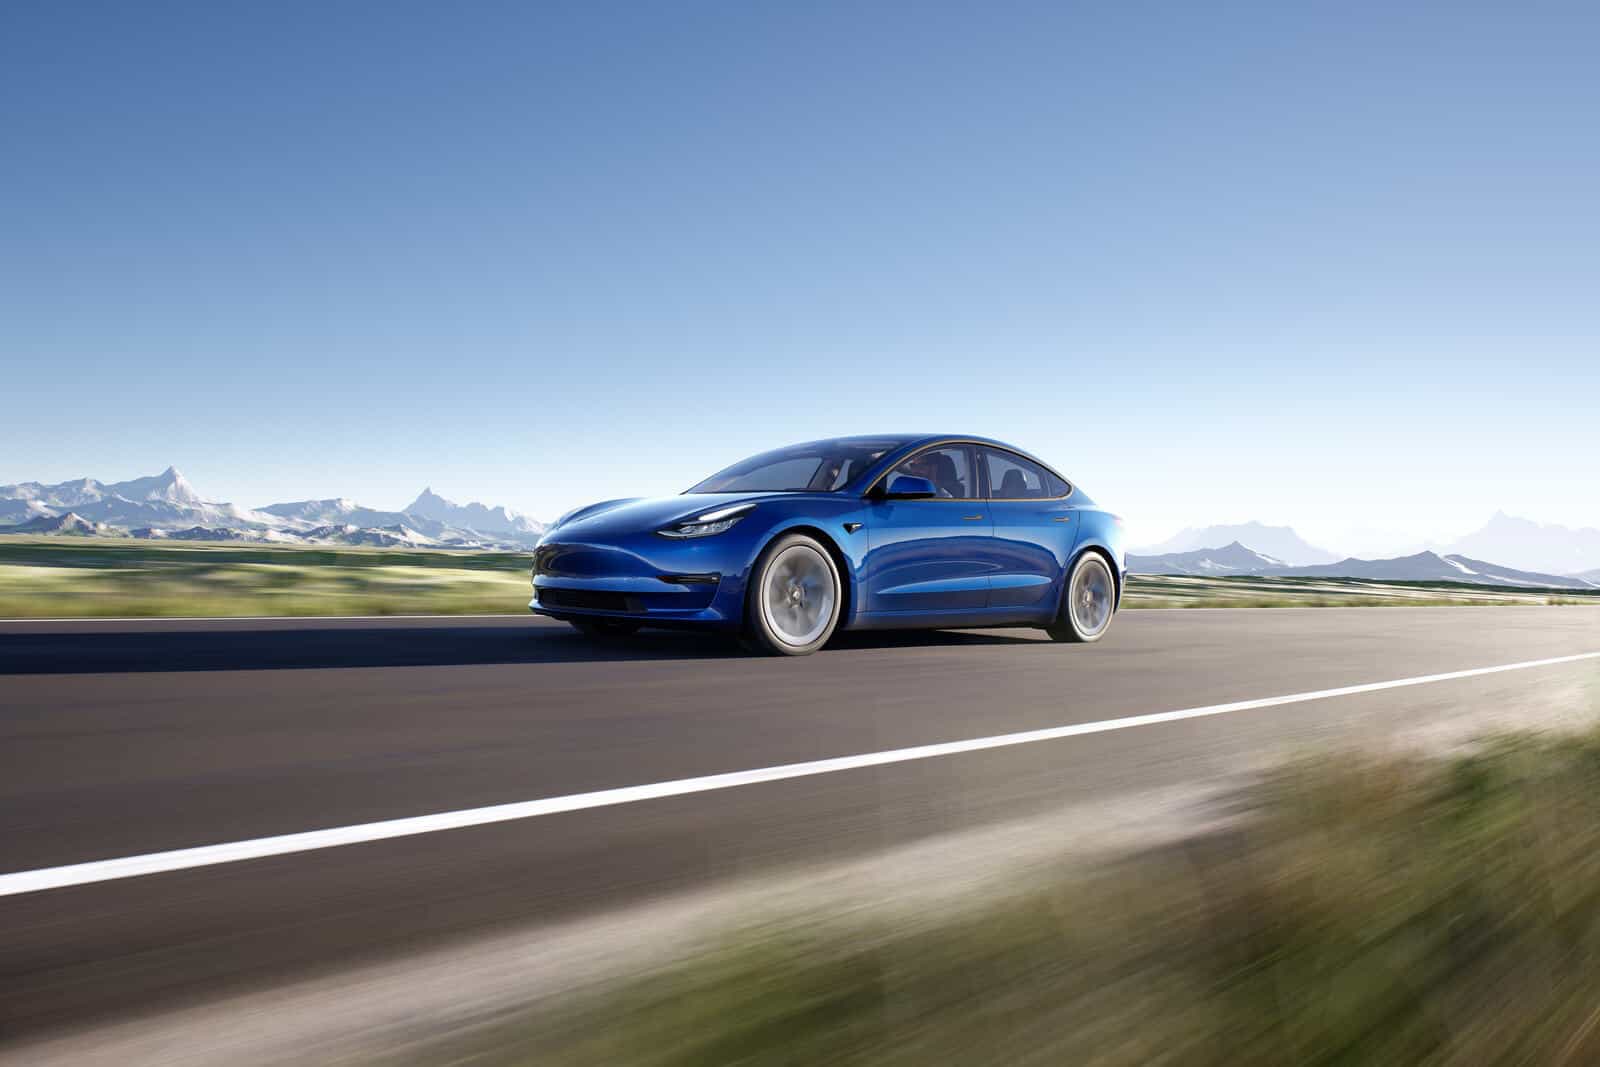 Image showcasing Tesla model 3 driving on a paved highway road